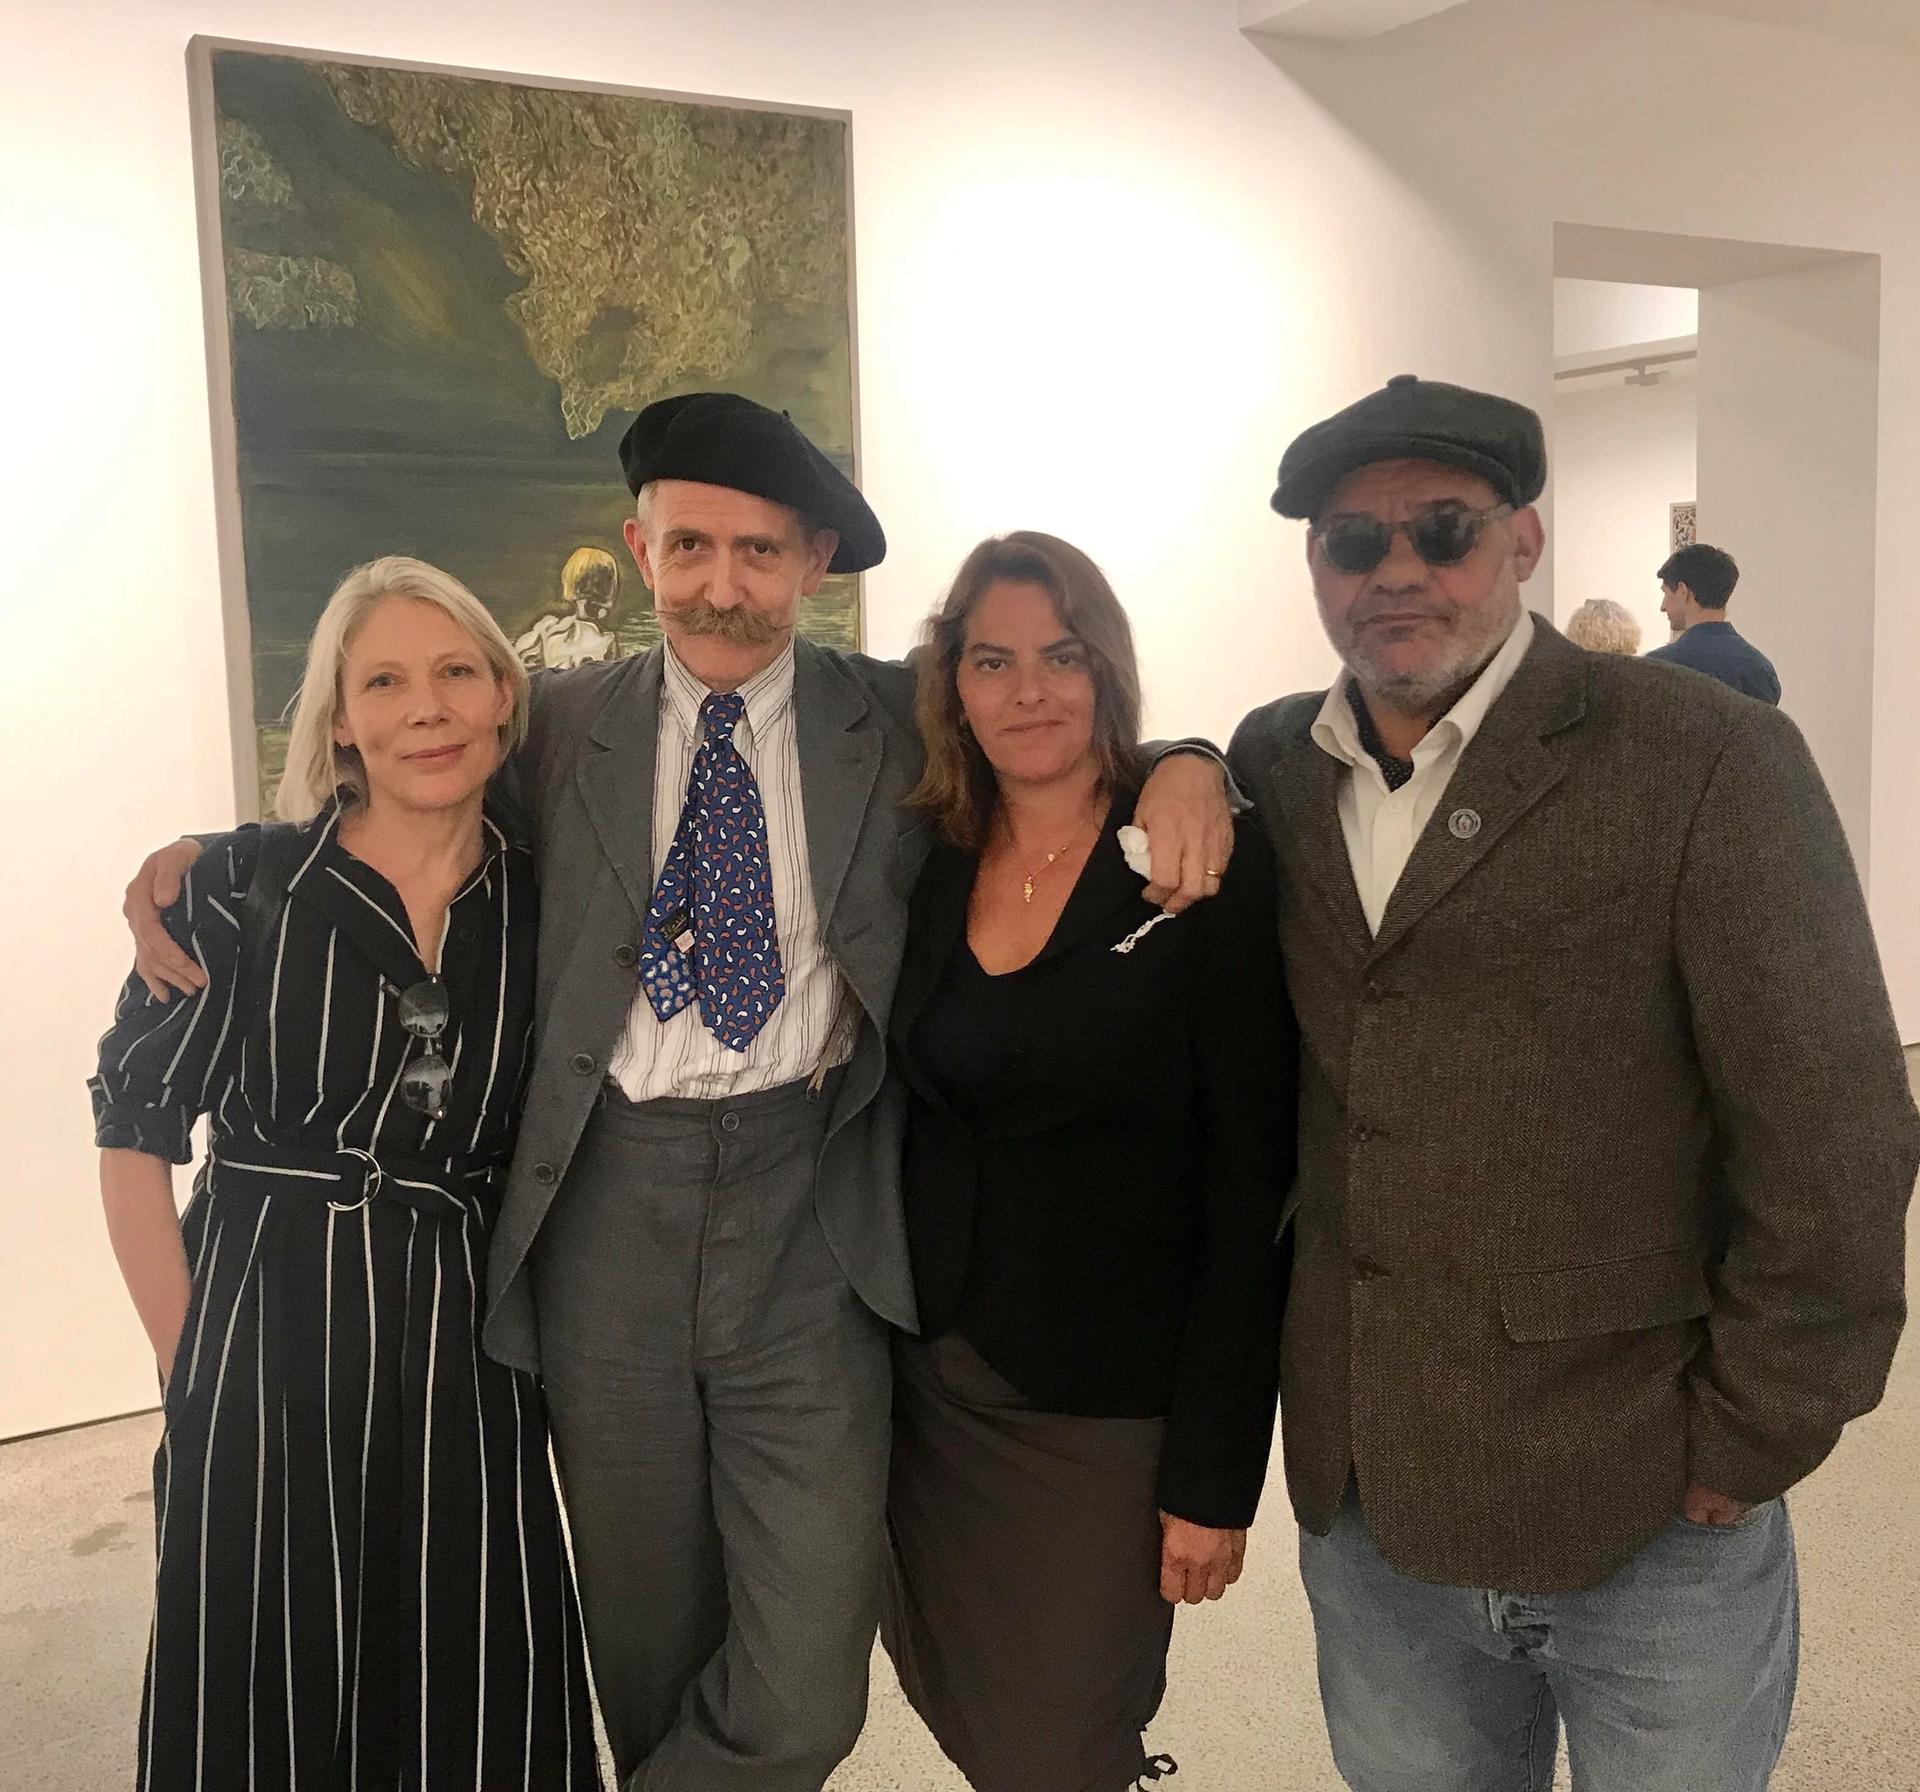 Emily King, Billy Childish, Tracey Emin and her brother Paul Emin Courtesy of Louisa Buck